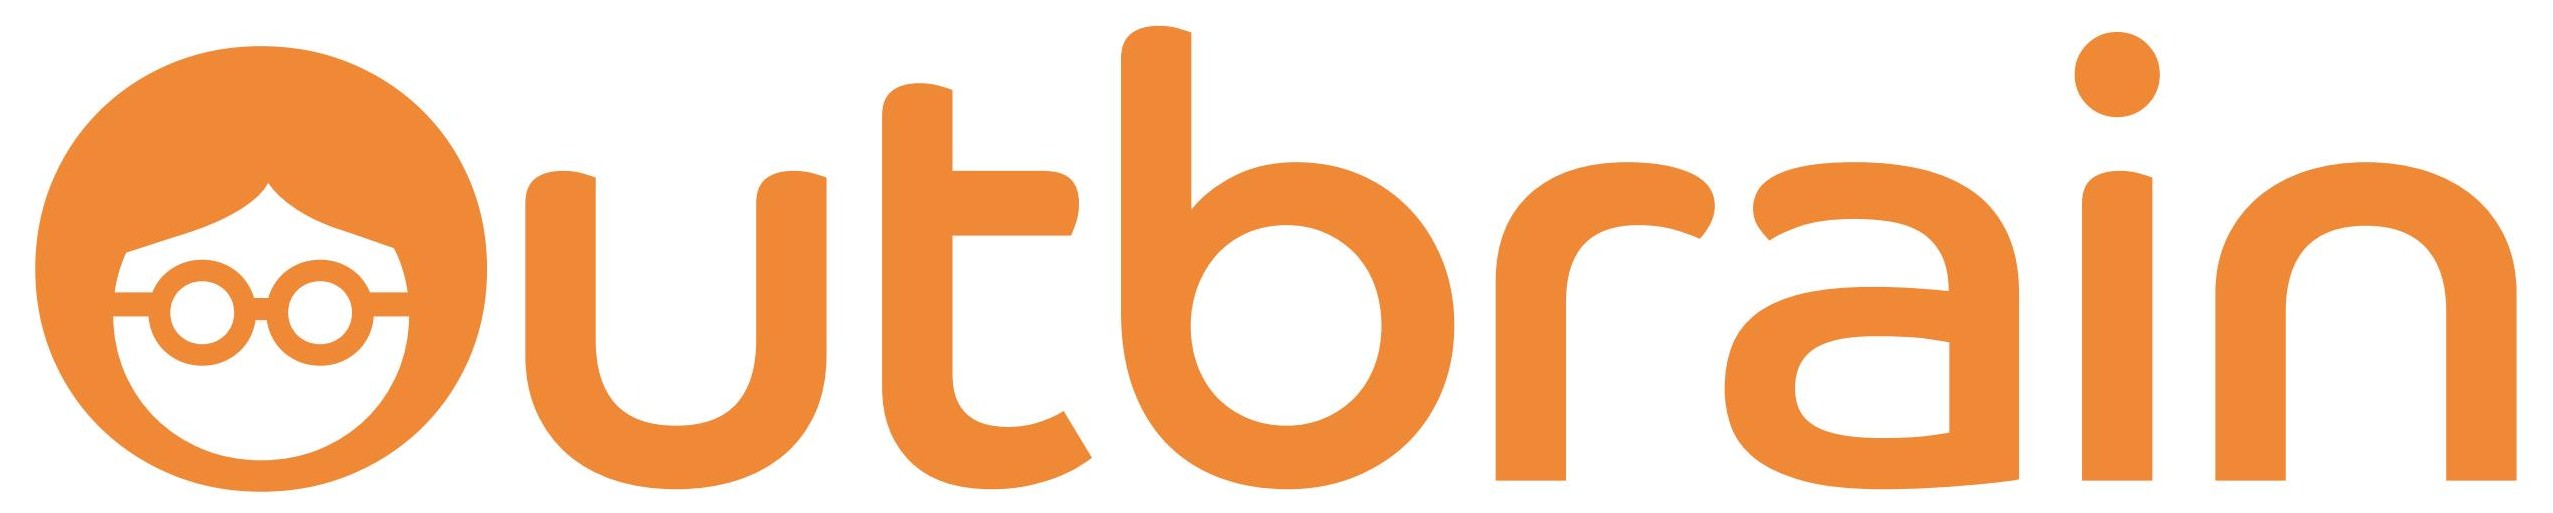 Outbrain-logo, Outbrain Vector PNG - Free PNG